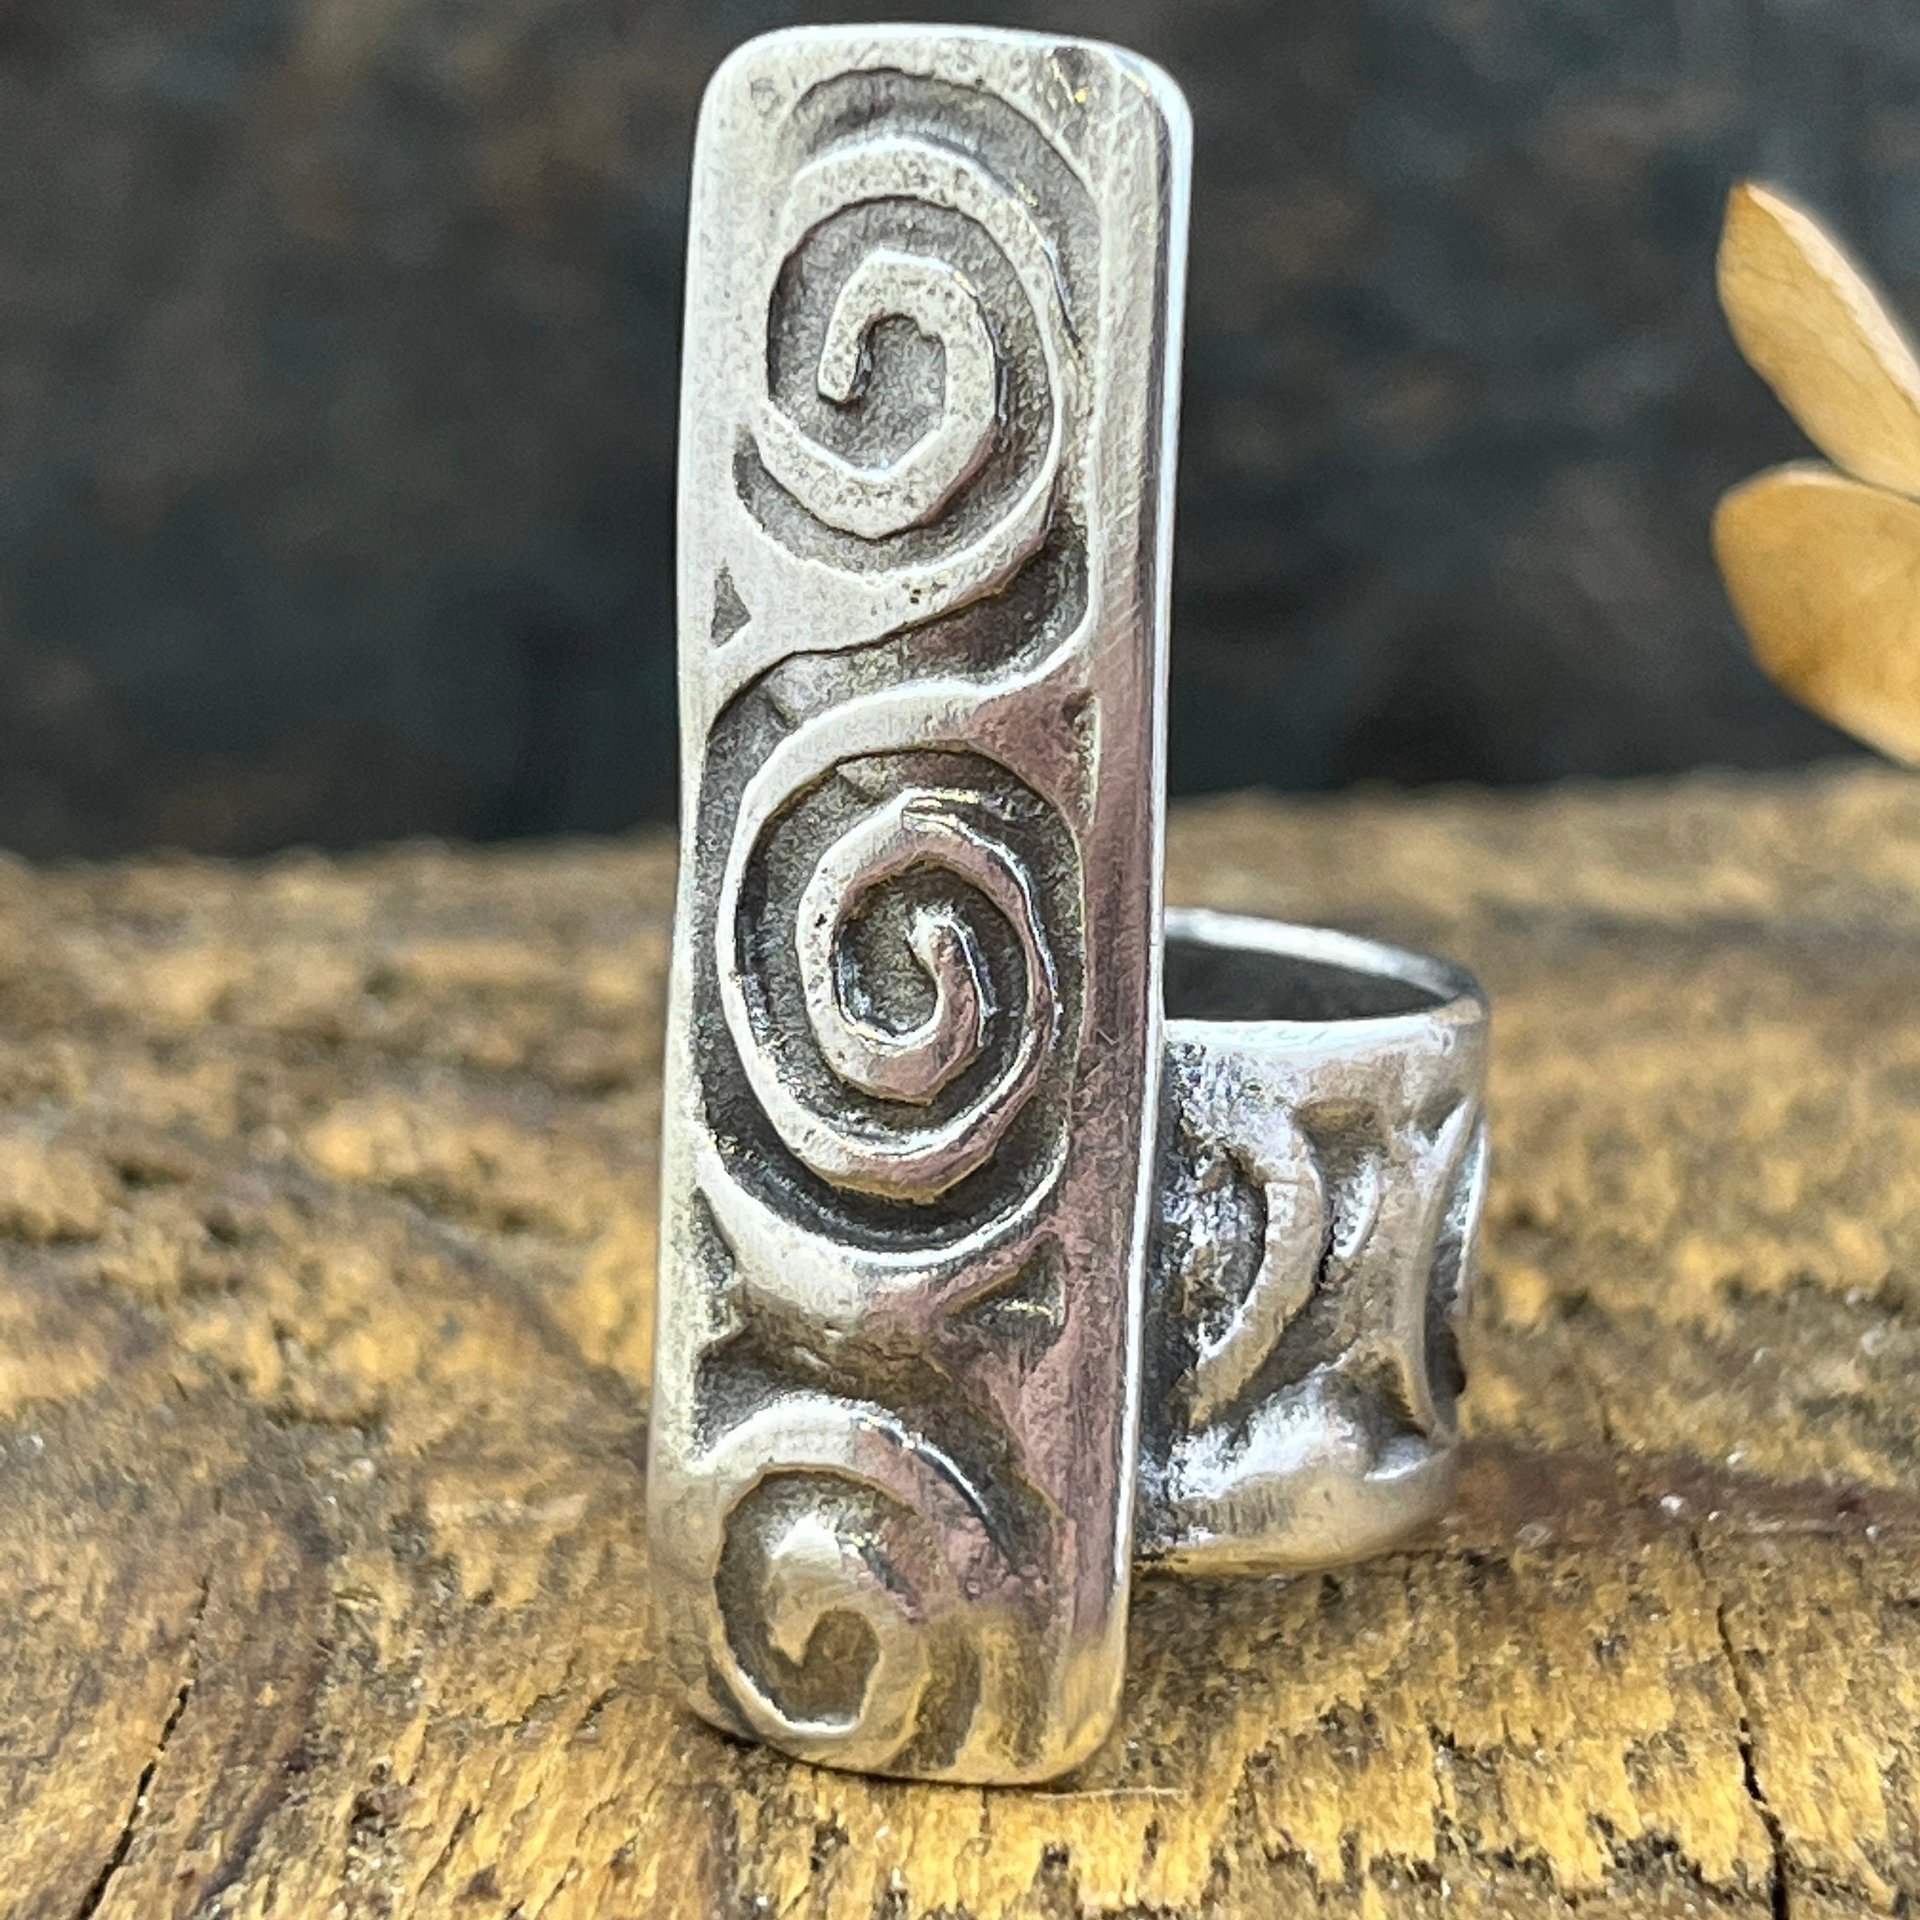 Silver Spiral Ring, Sterling Silver 960, Irish Celtic Spirals, Shied Ring, Statement Jewelry, Druid Pagan, Earthy Rustic Jewelry, Eternity